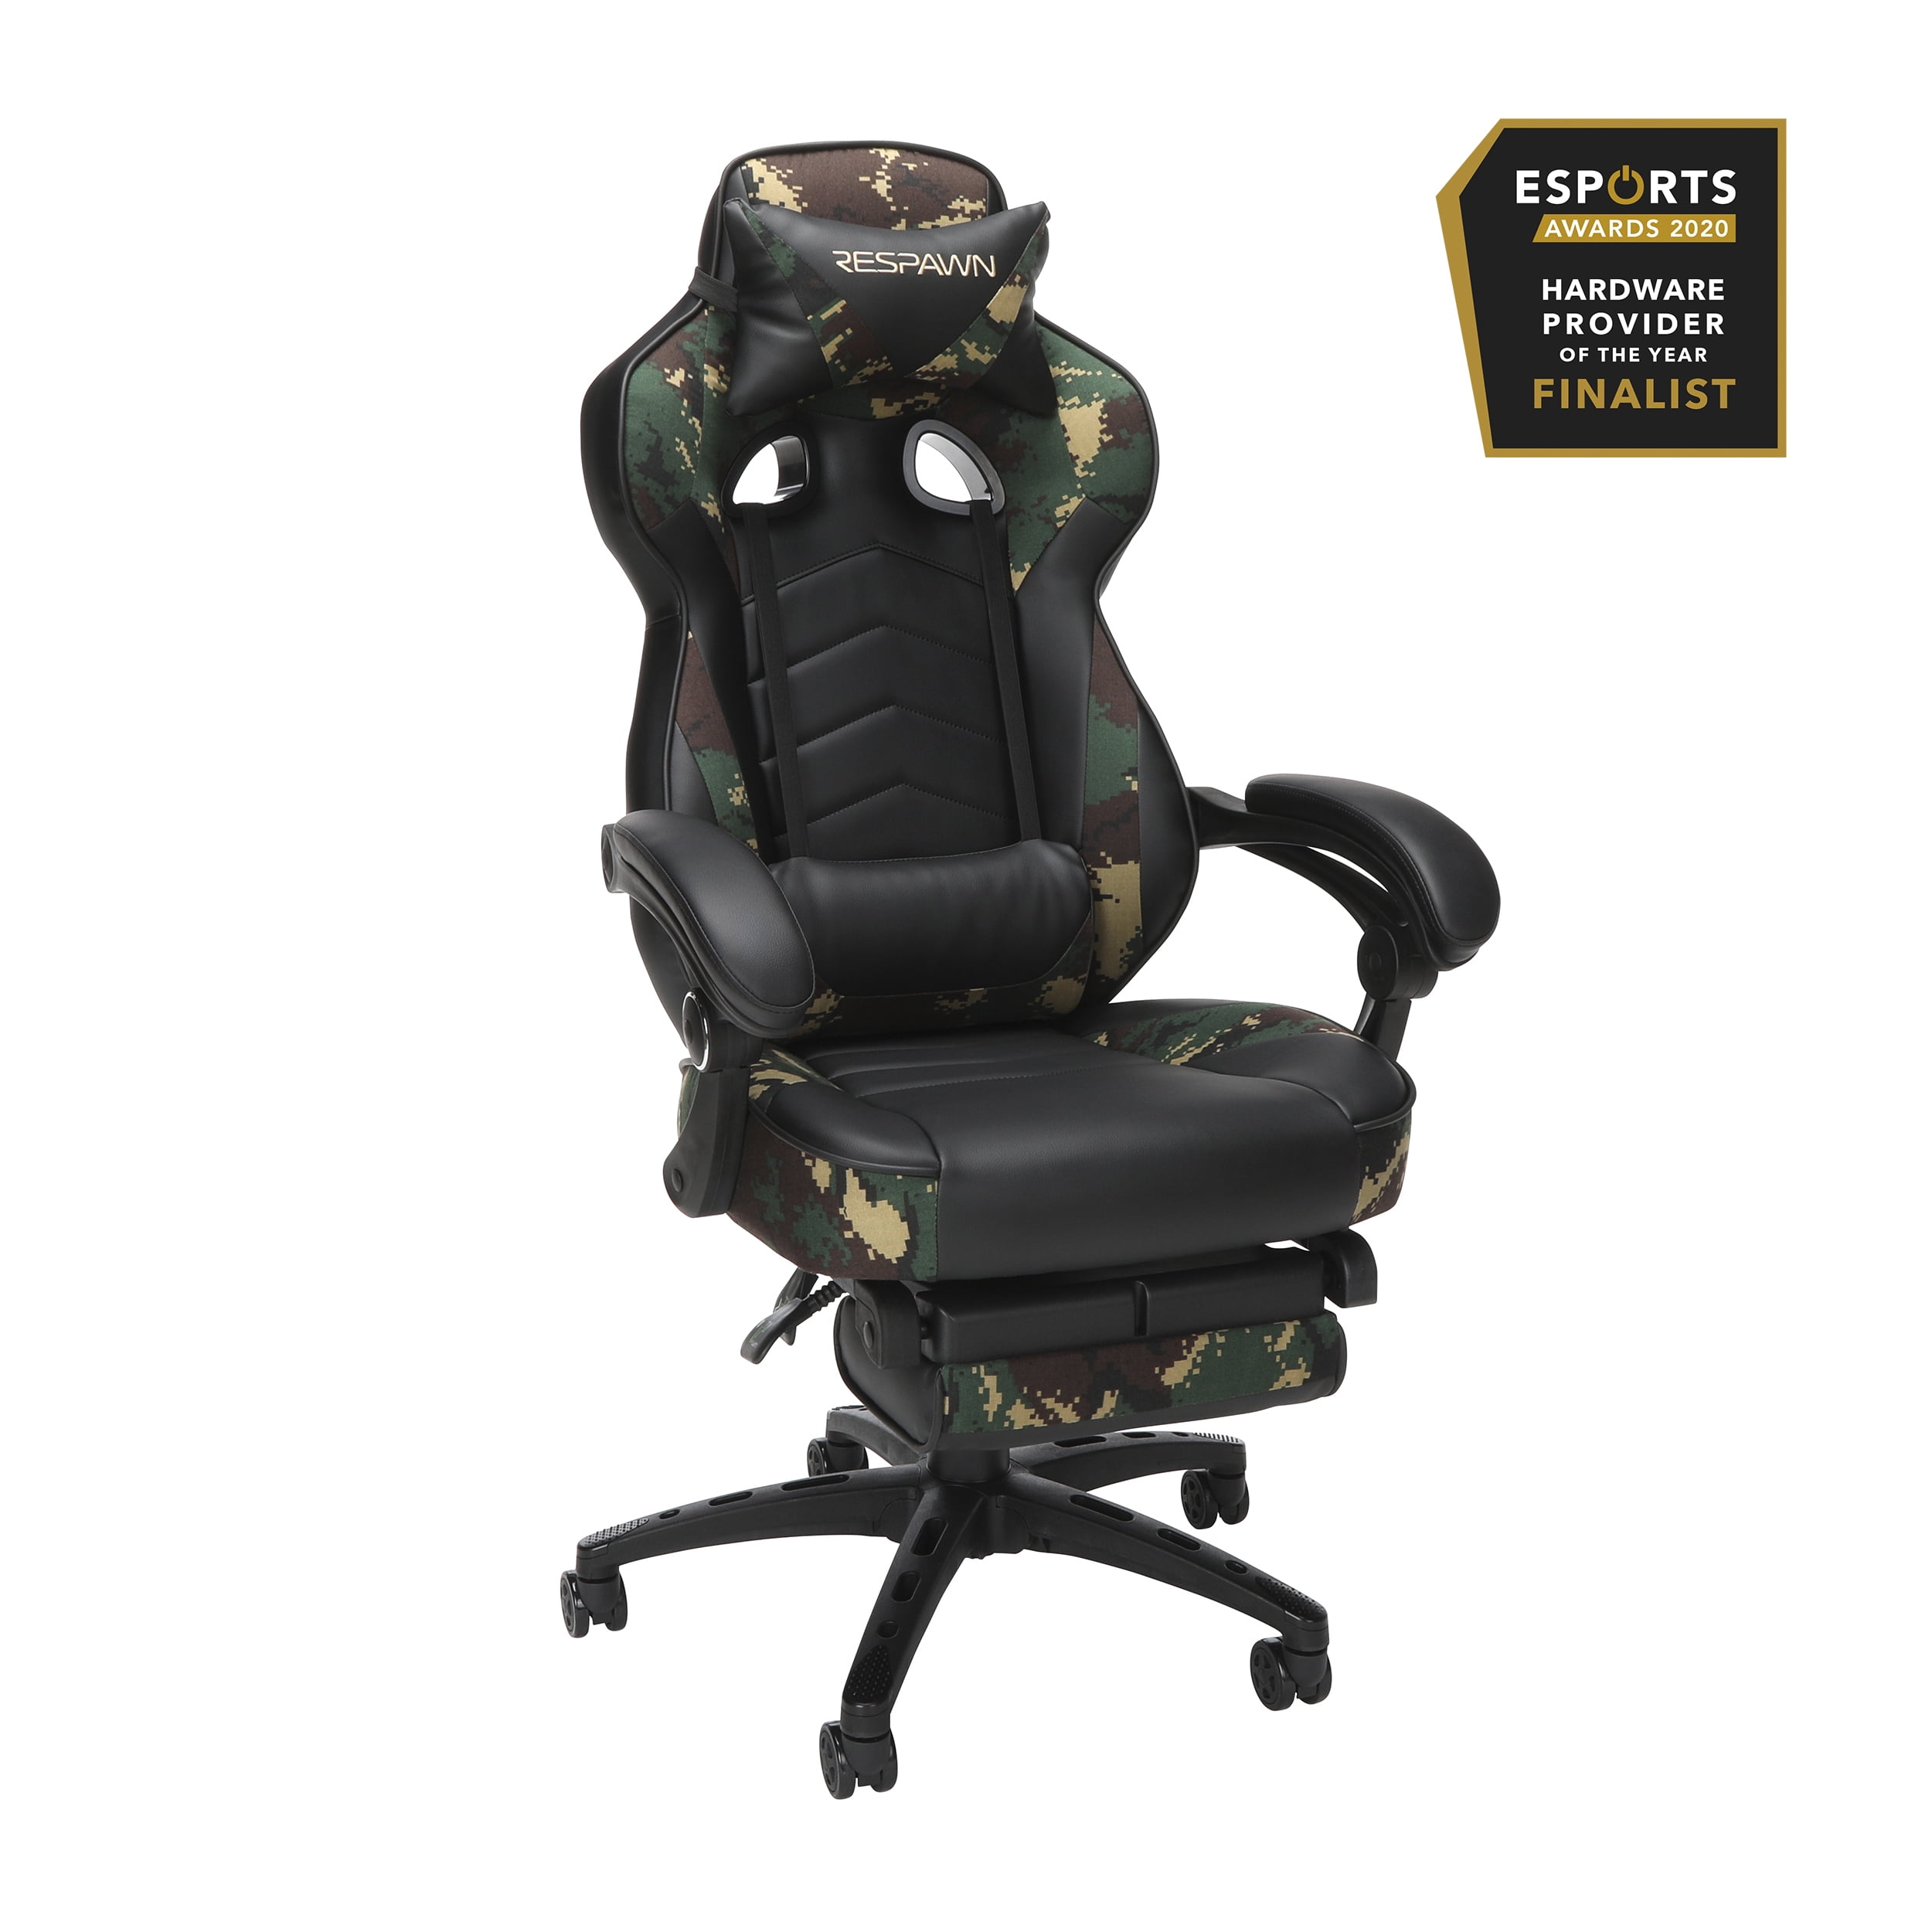 RESPAWN 110 Racing Style Gaming Chair, Reclining Chair with Footrest